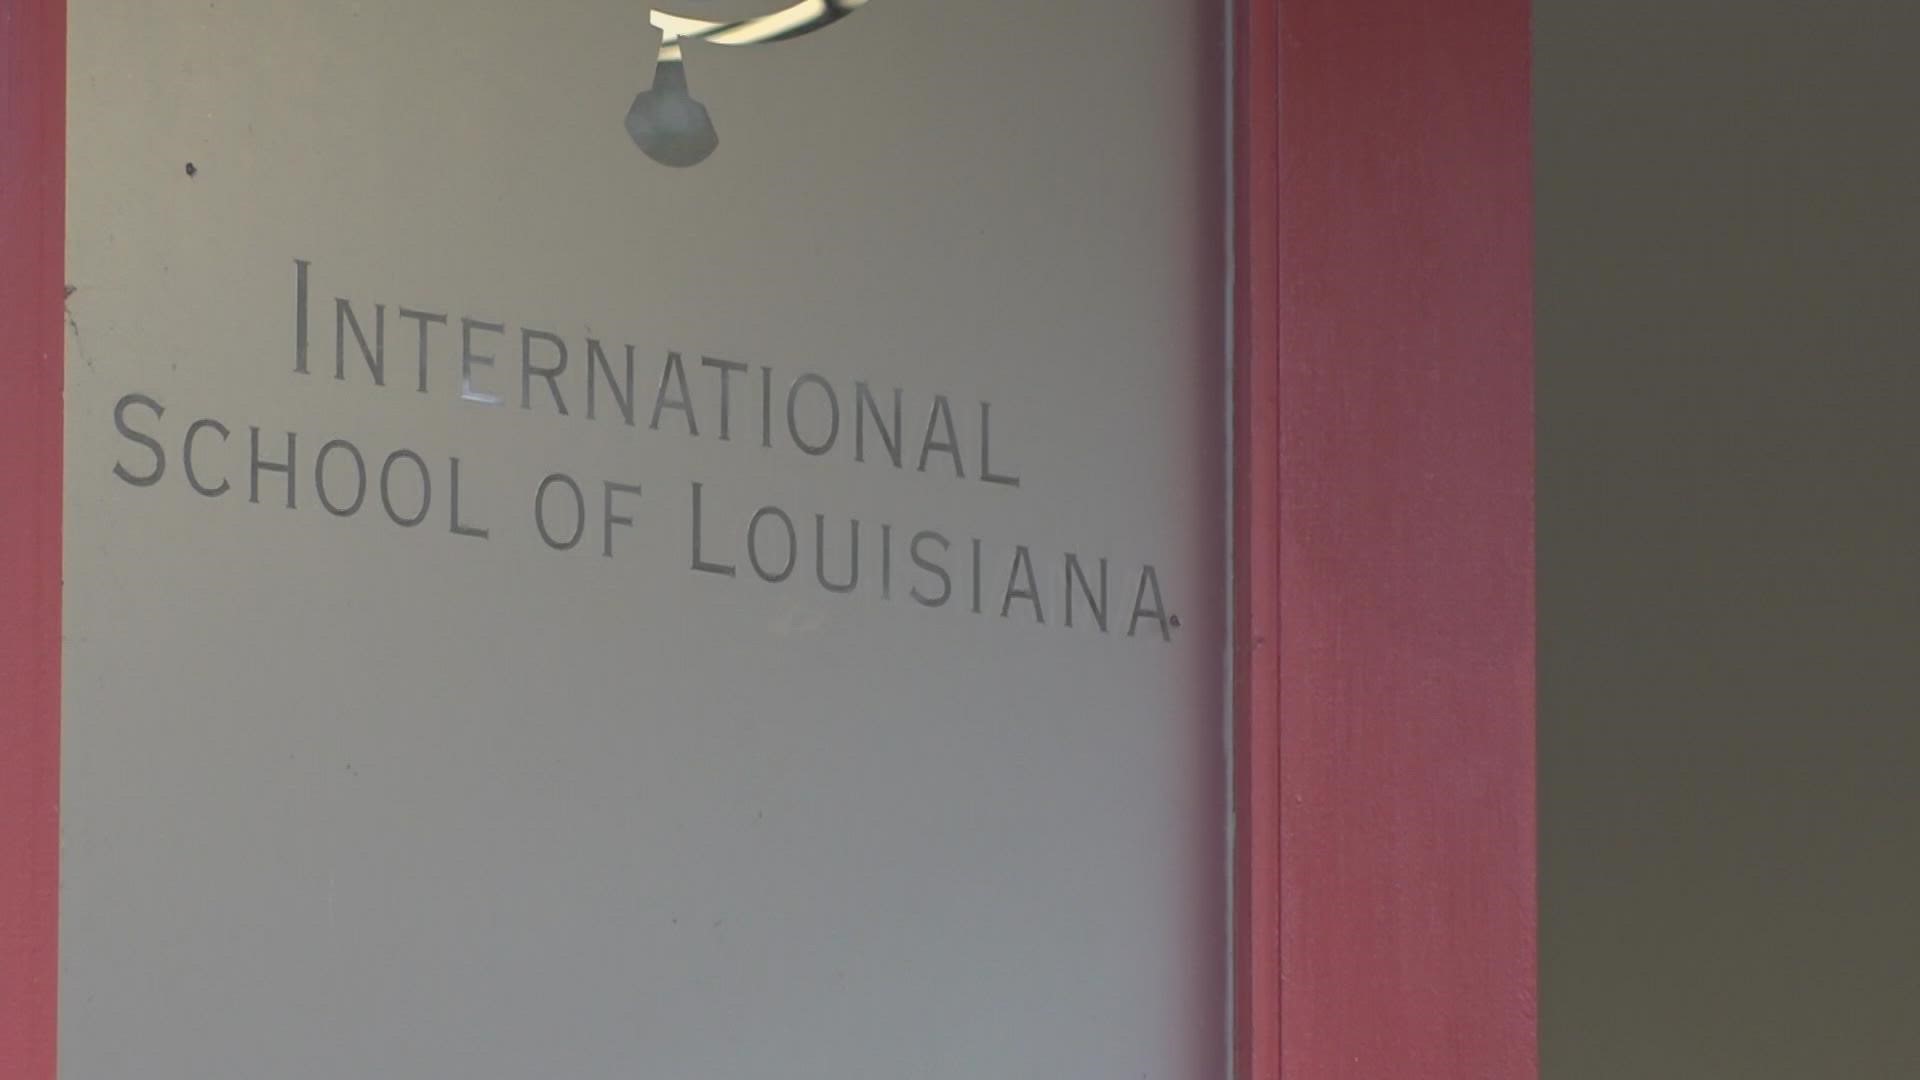 Between 1920 to 1974, the Louisiana Constitution banned French as the primary language taught in public schools, according to Nous Foundation.